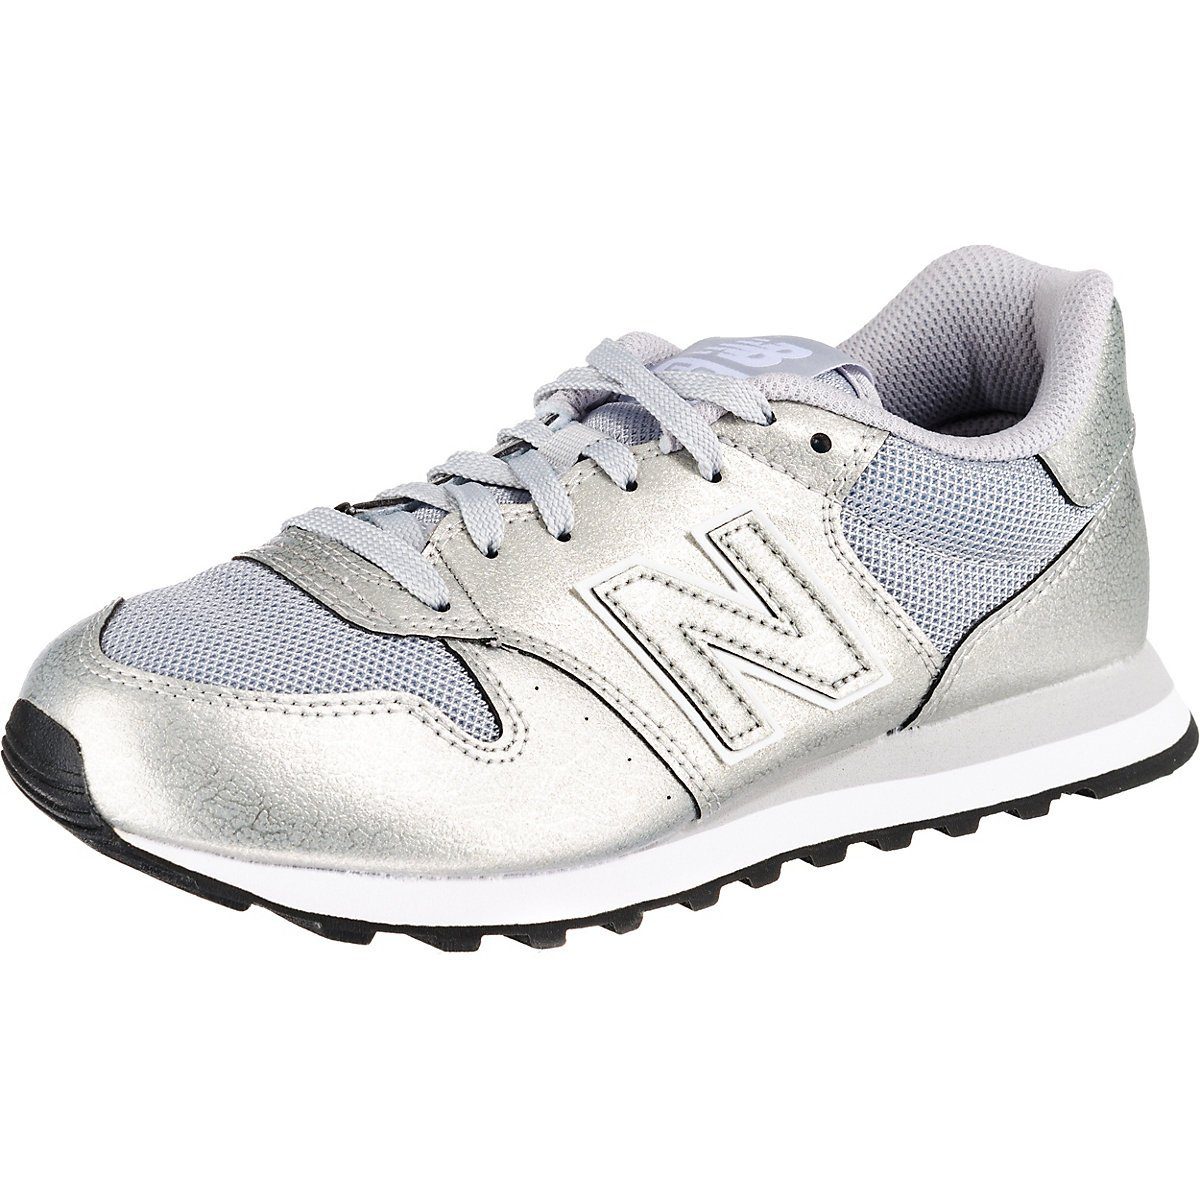 New Balance »GW500 Sneakers Low« Sneaker, Obermaterial: Materialmix aus  Synthetik und Textil online kaufen | OTTO